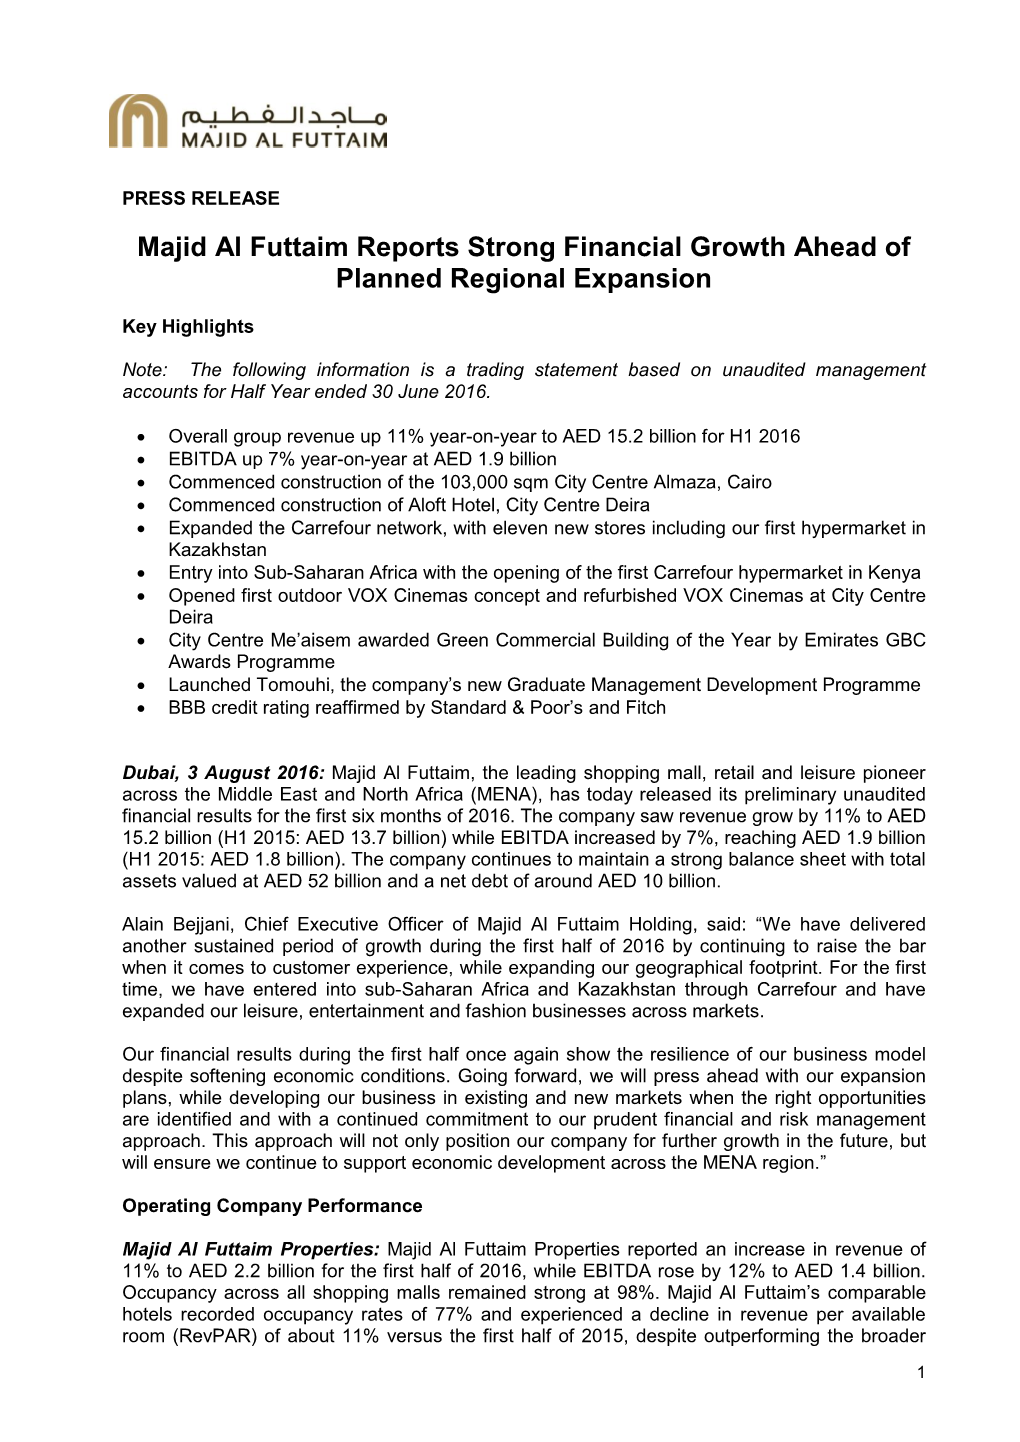 Majid Al Futtaim Reports Strong Financial Growth Ahead of Planned Regional Expansion